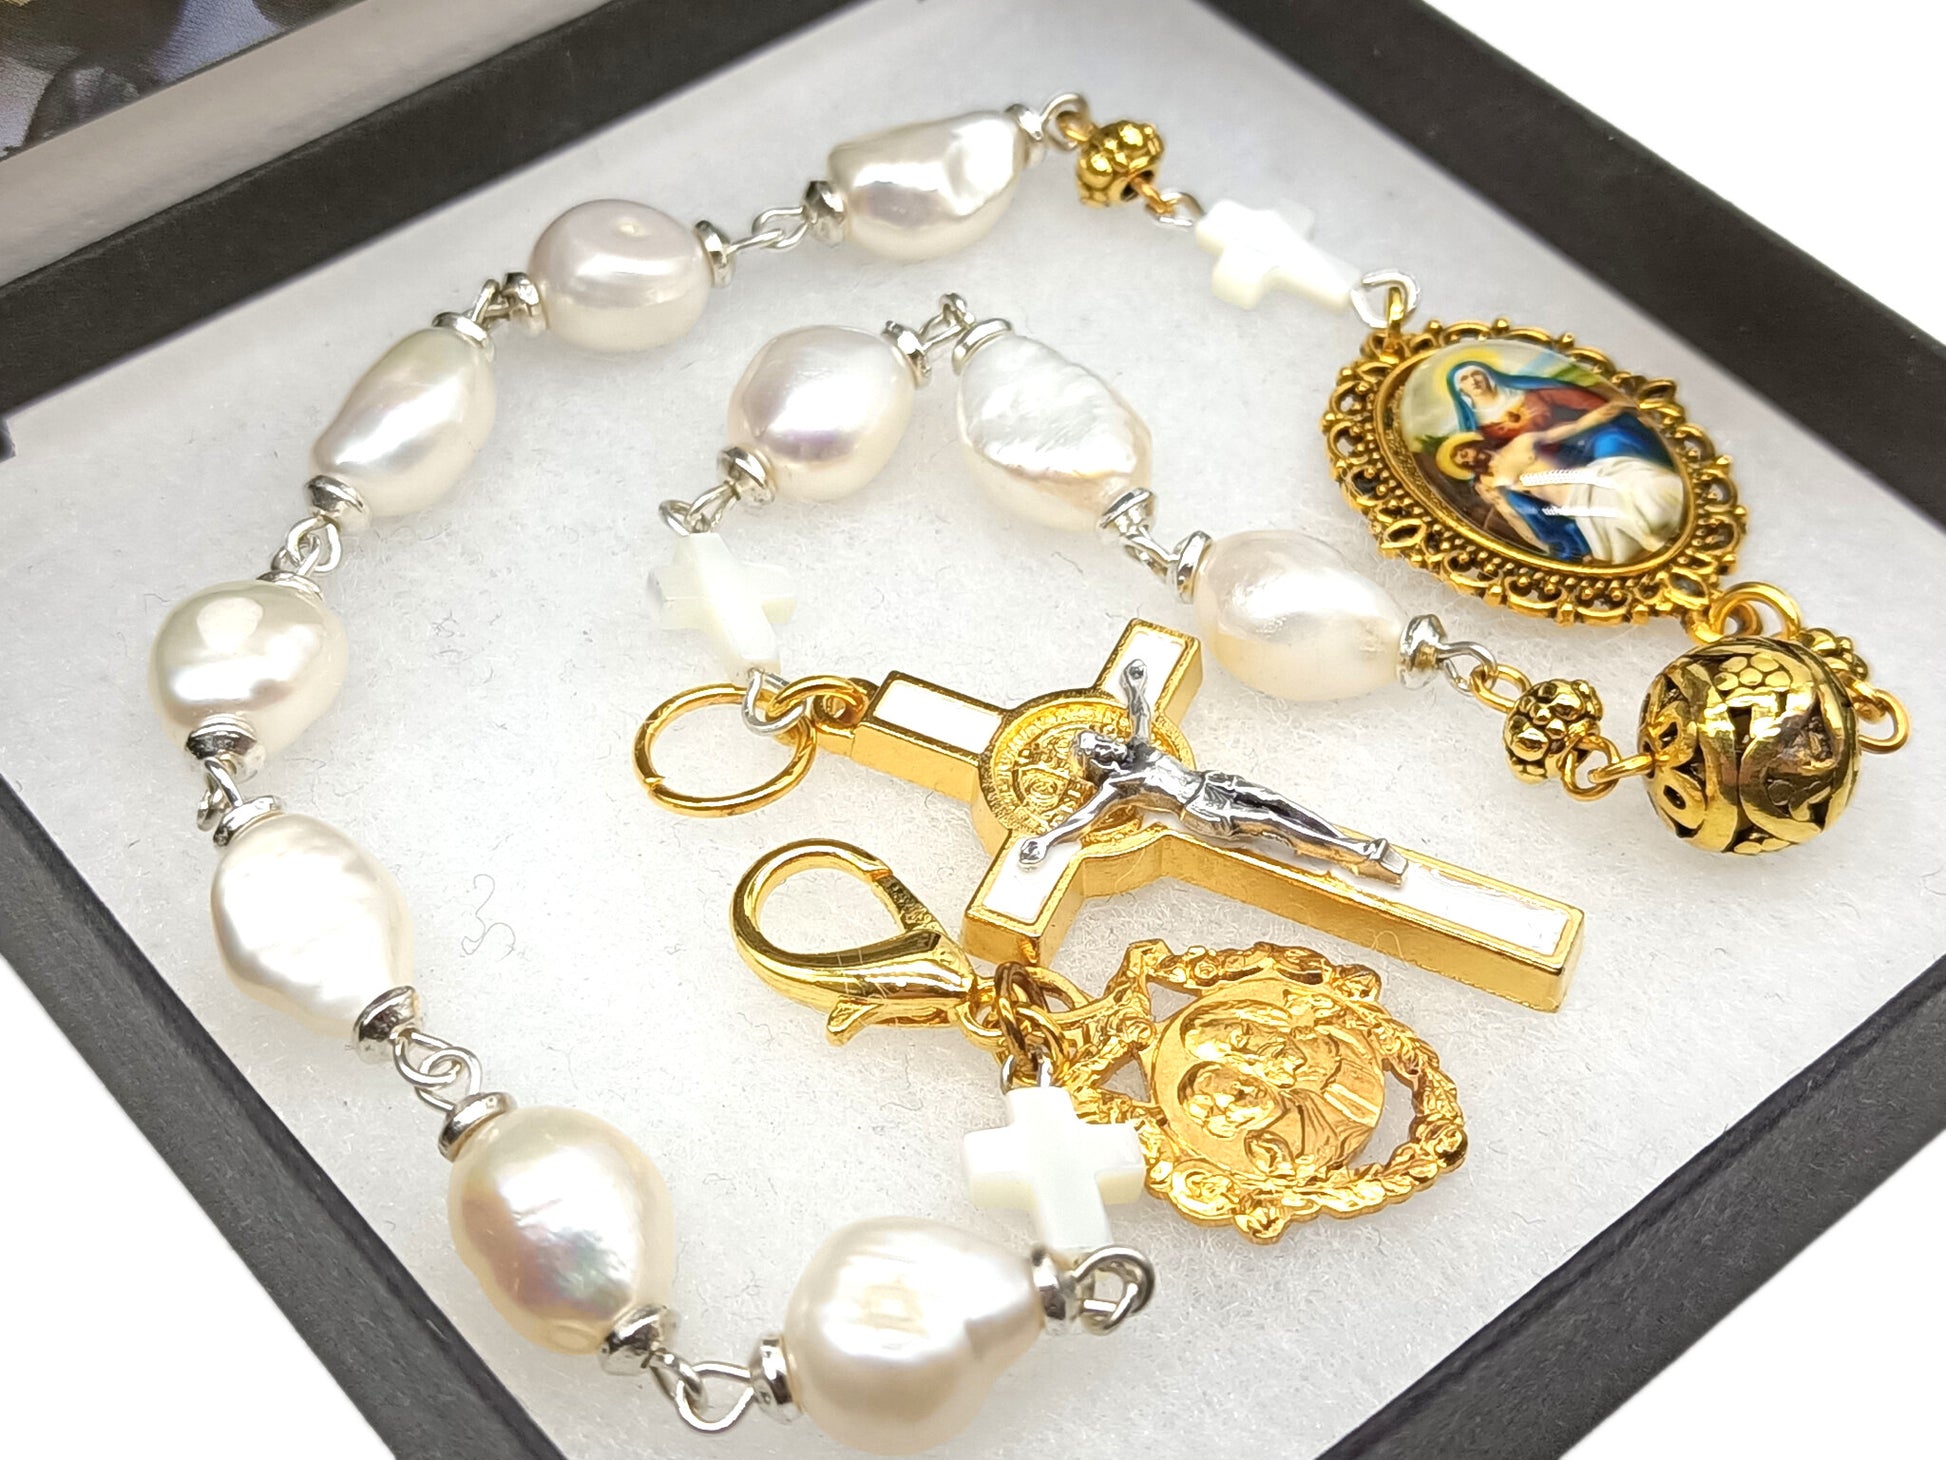 Pocket servite unique rosary beads with fresh water pearl beads and gold crucifix, medals and clasp.